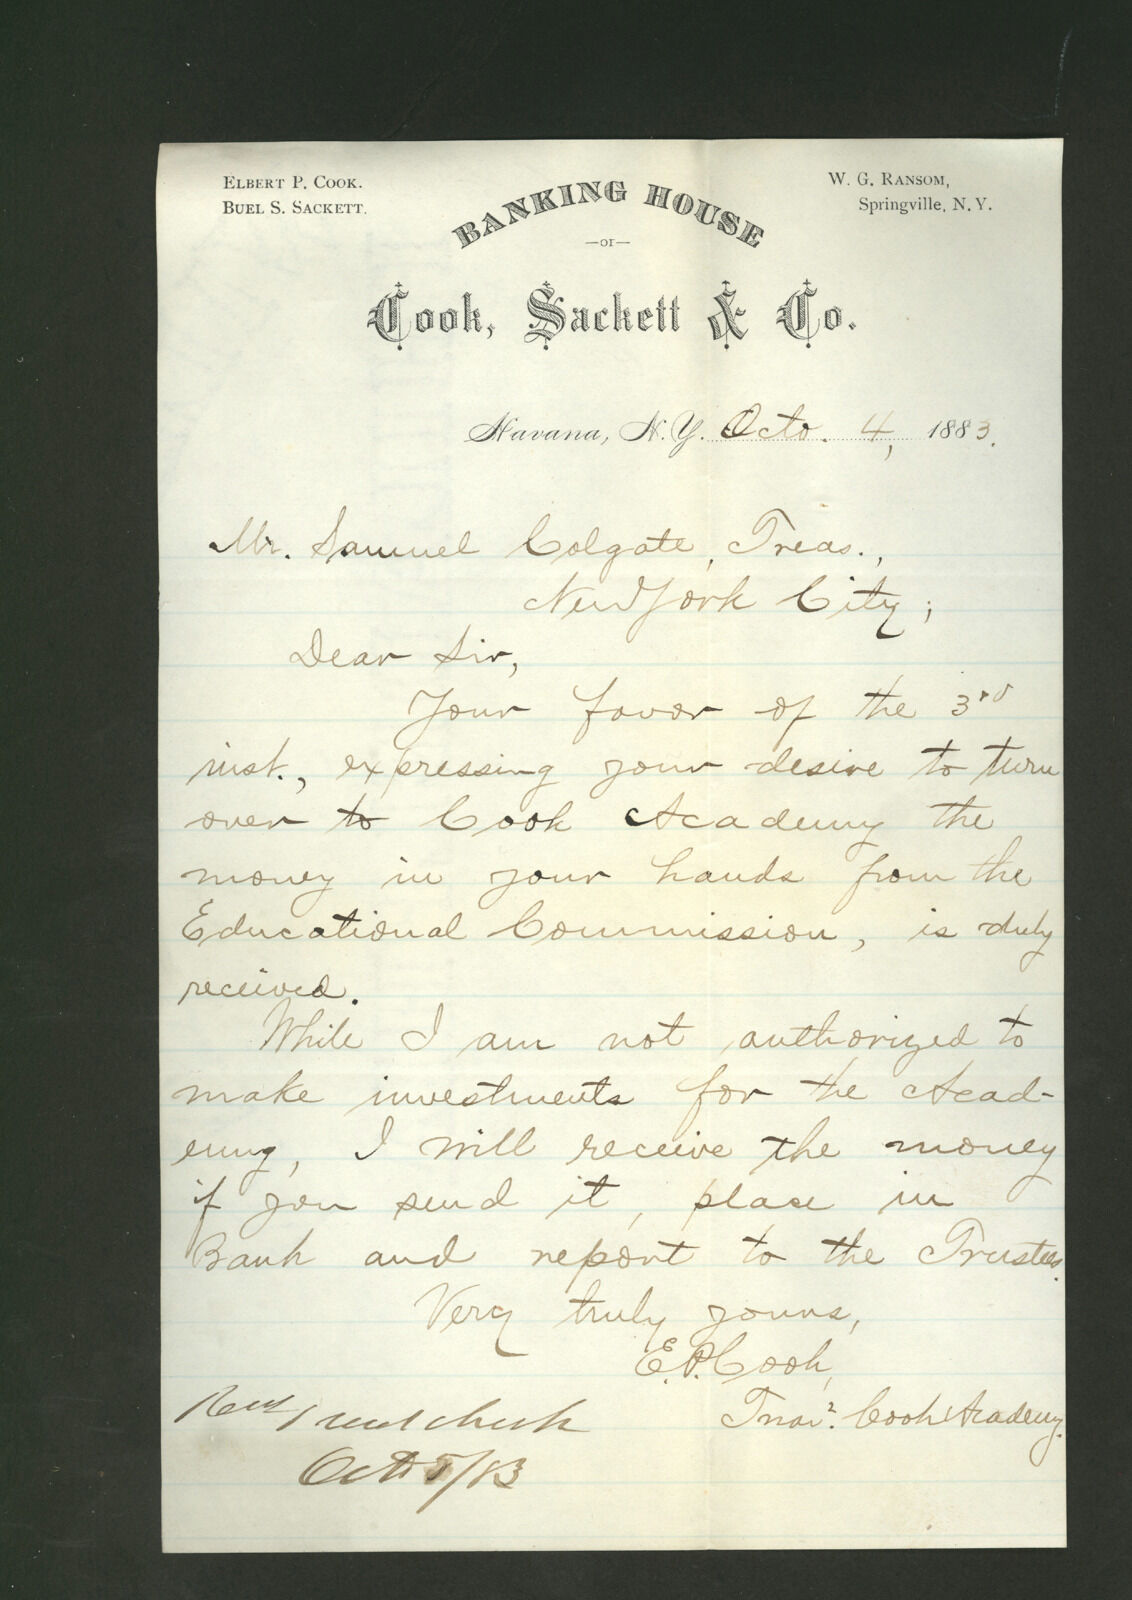 signed 1883 letter - Cook Academy to Samuel Colgate - Cook Sackett Banking House